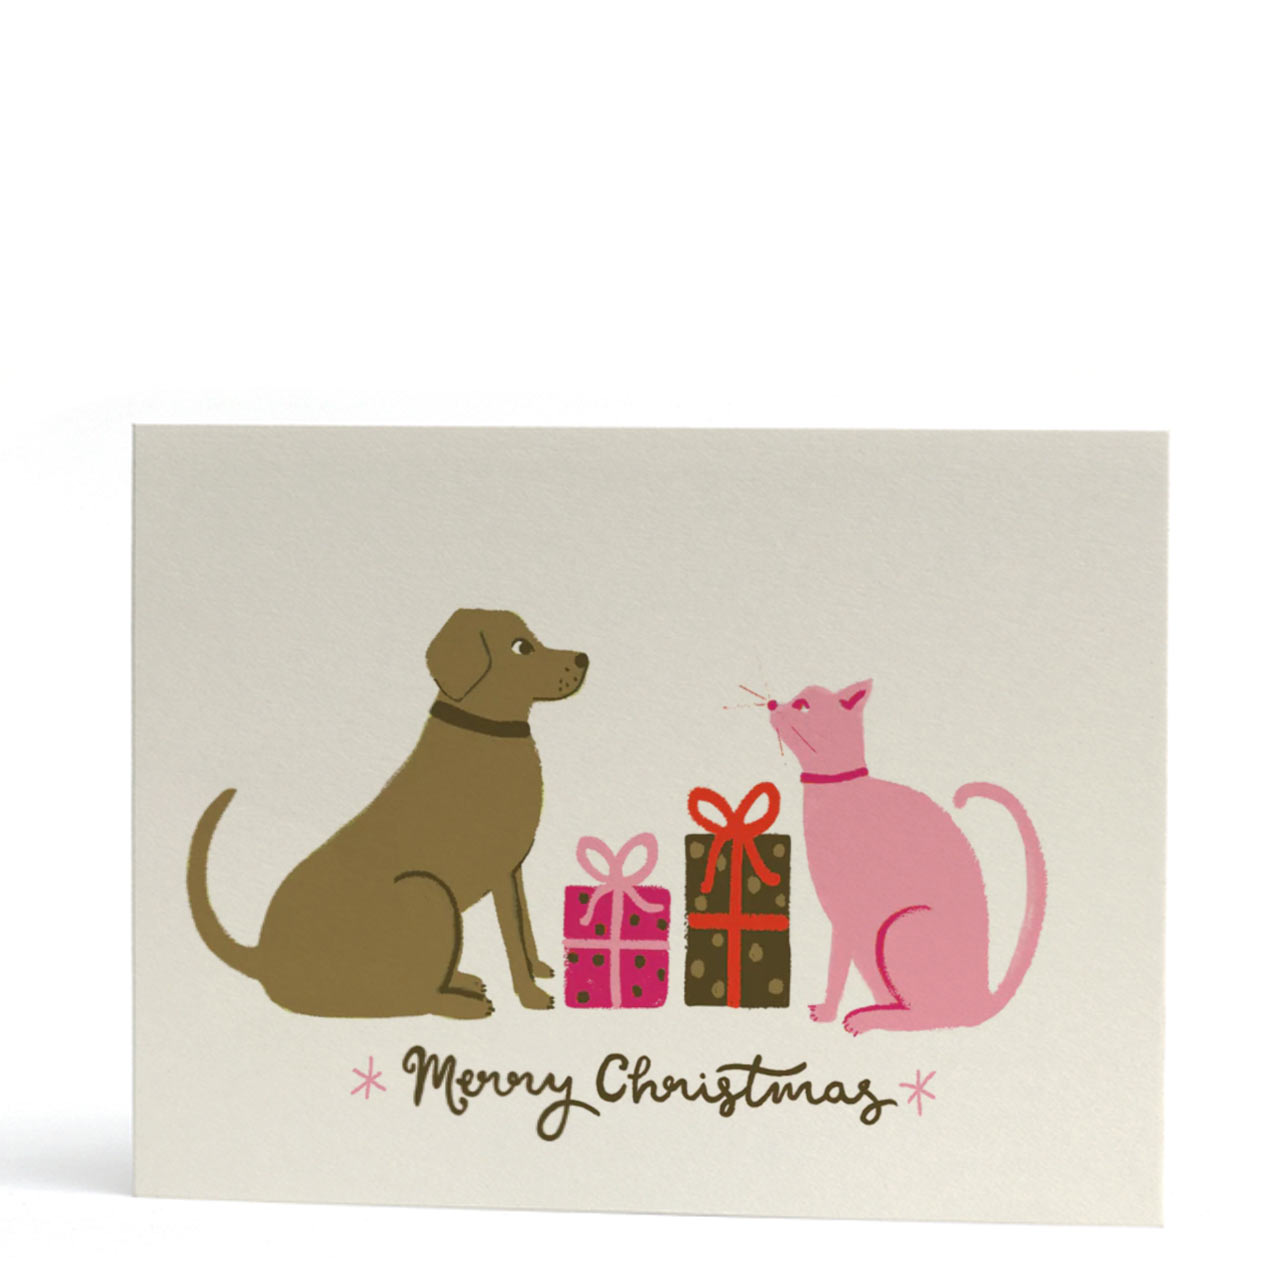 Smudge and Pink Kitty Merry Christmas Card